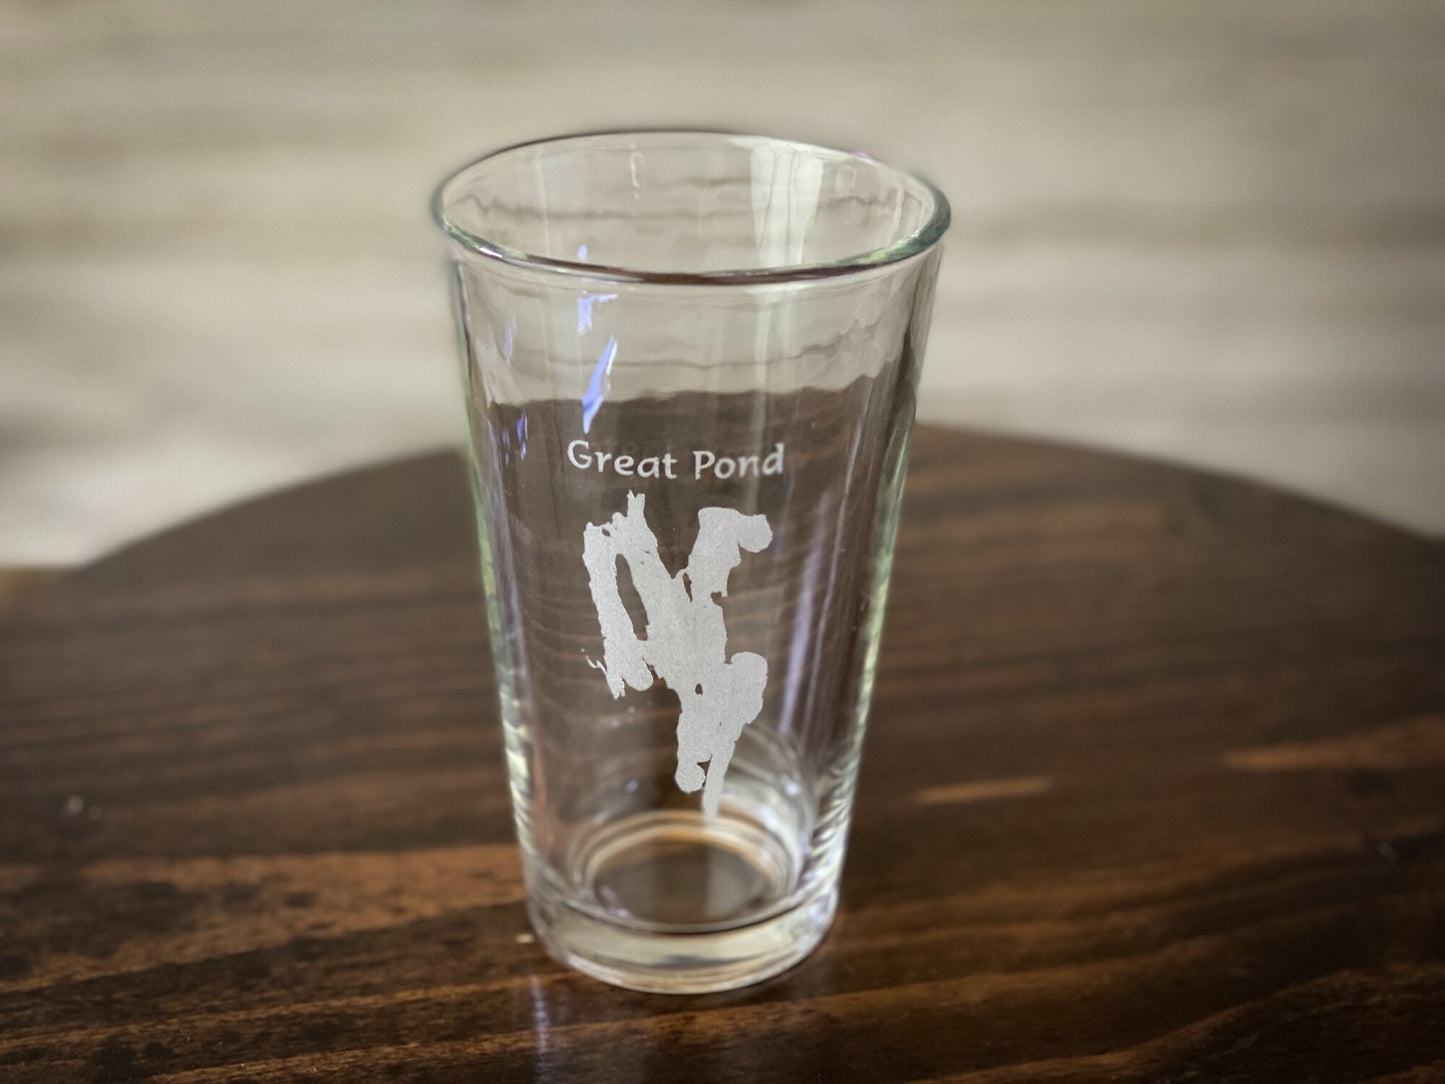 Great Pond Maine Pint Glass - Laser engraved pint glass